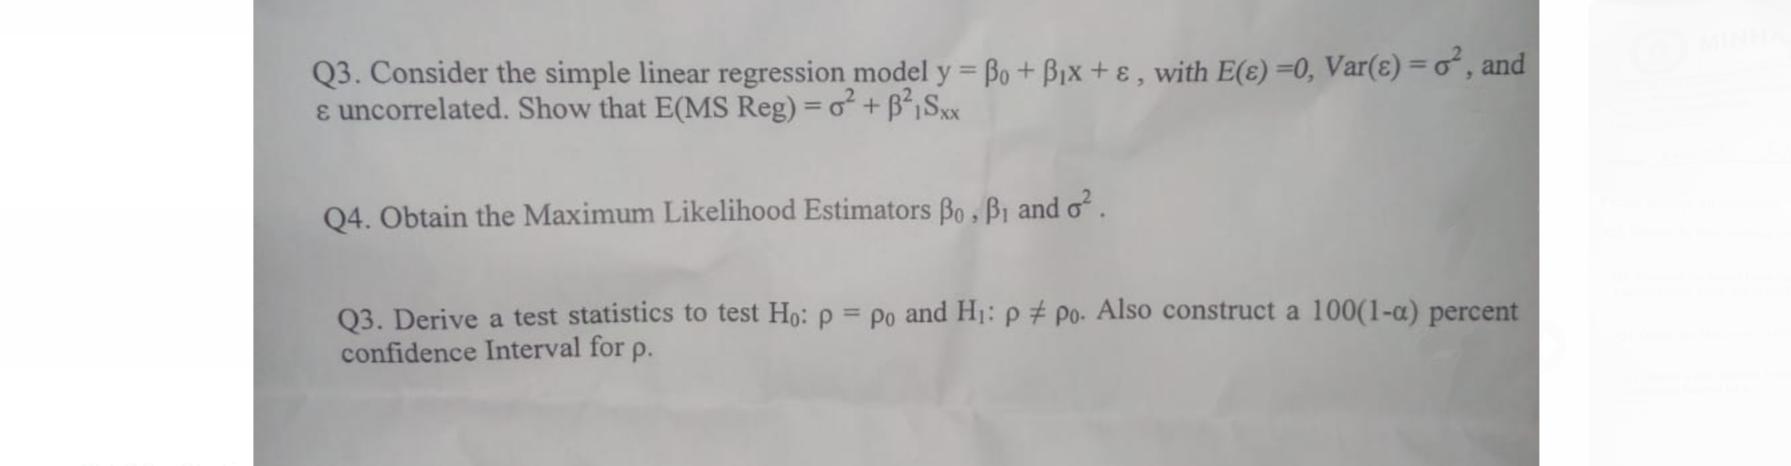 Q3. Consider the simple linear regression model y = Bo + Bx + &, with E(e) =0, Var(e) = o, and &